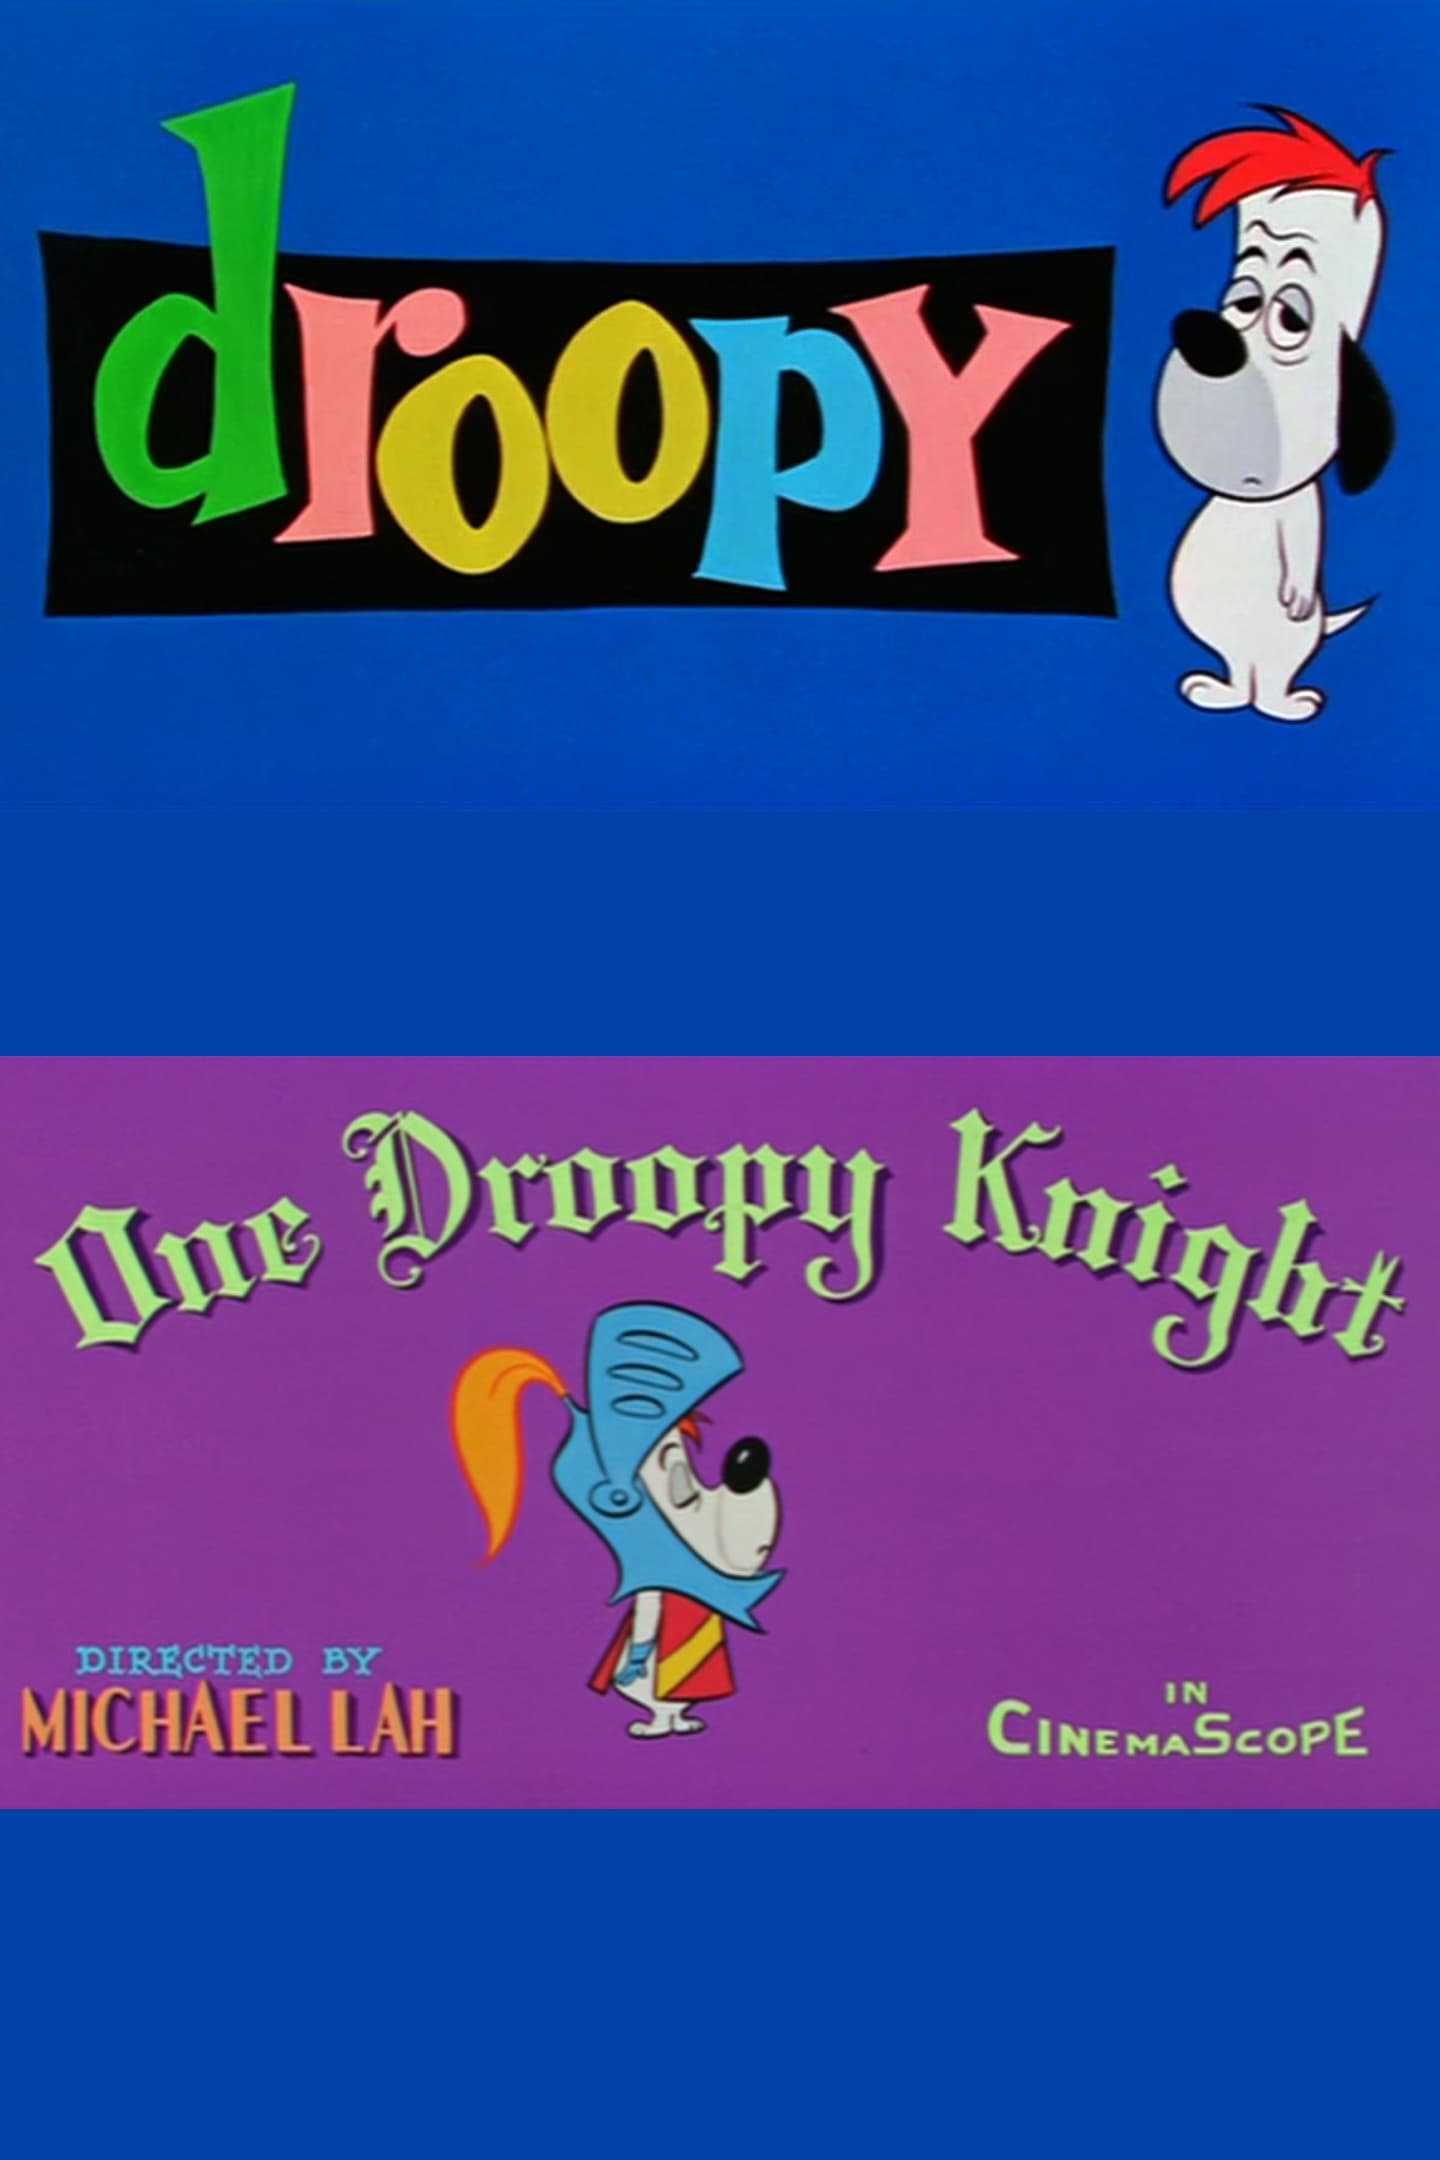 One Droopy Knight